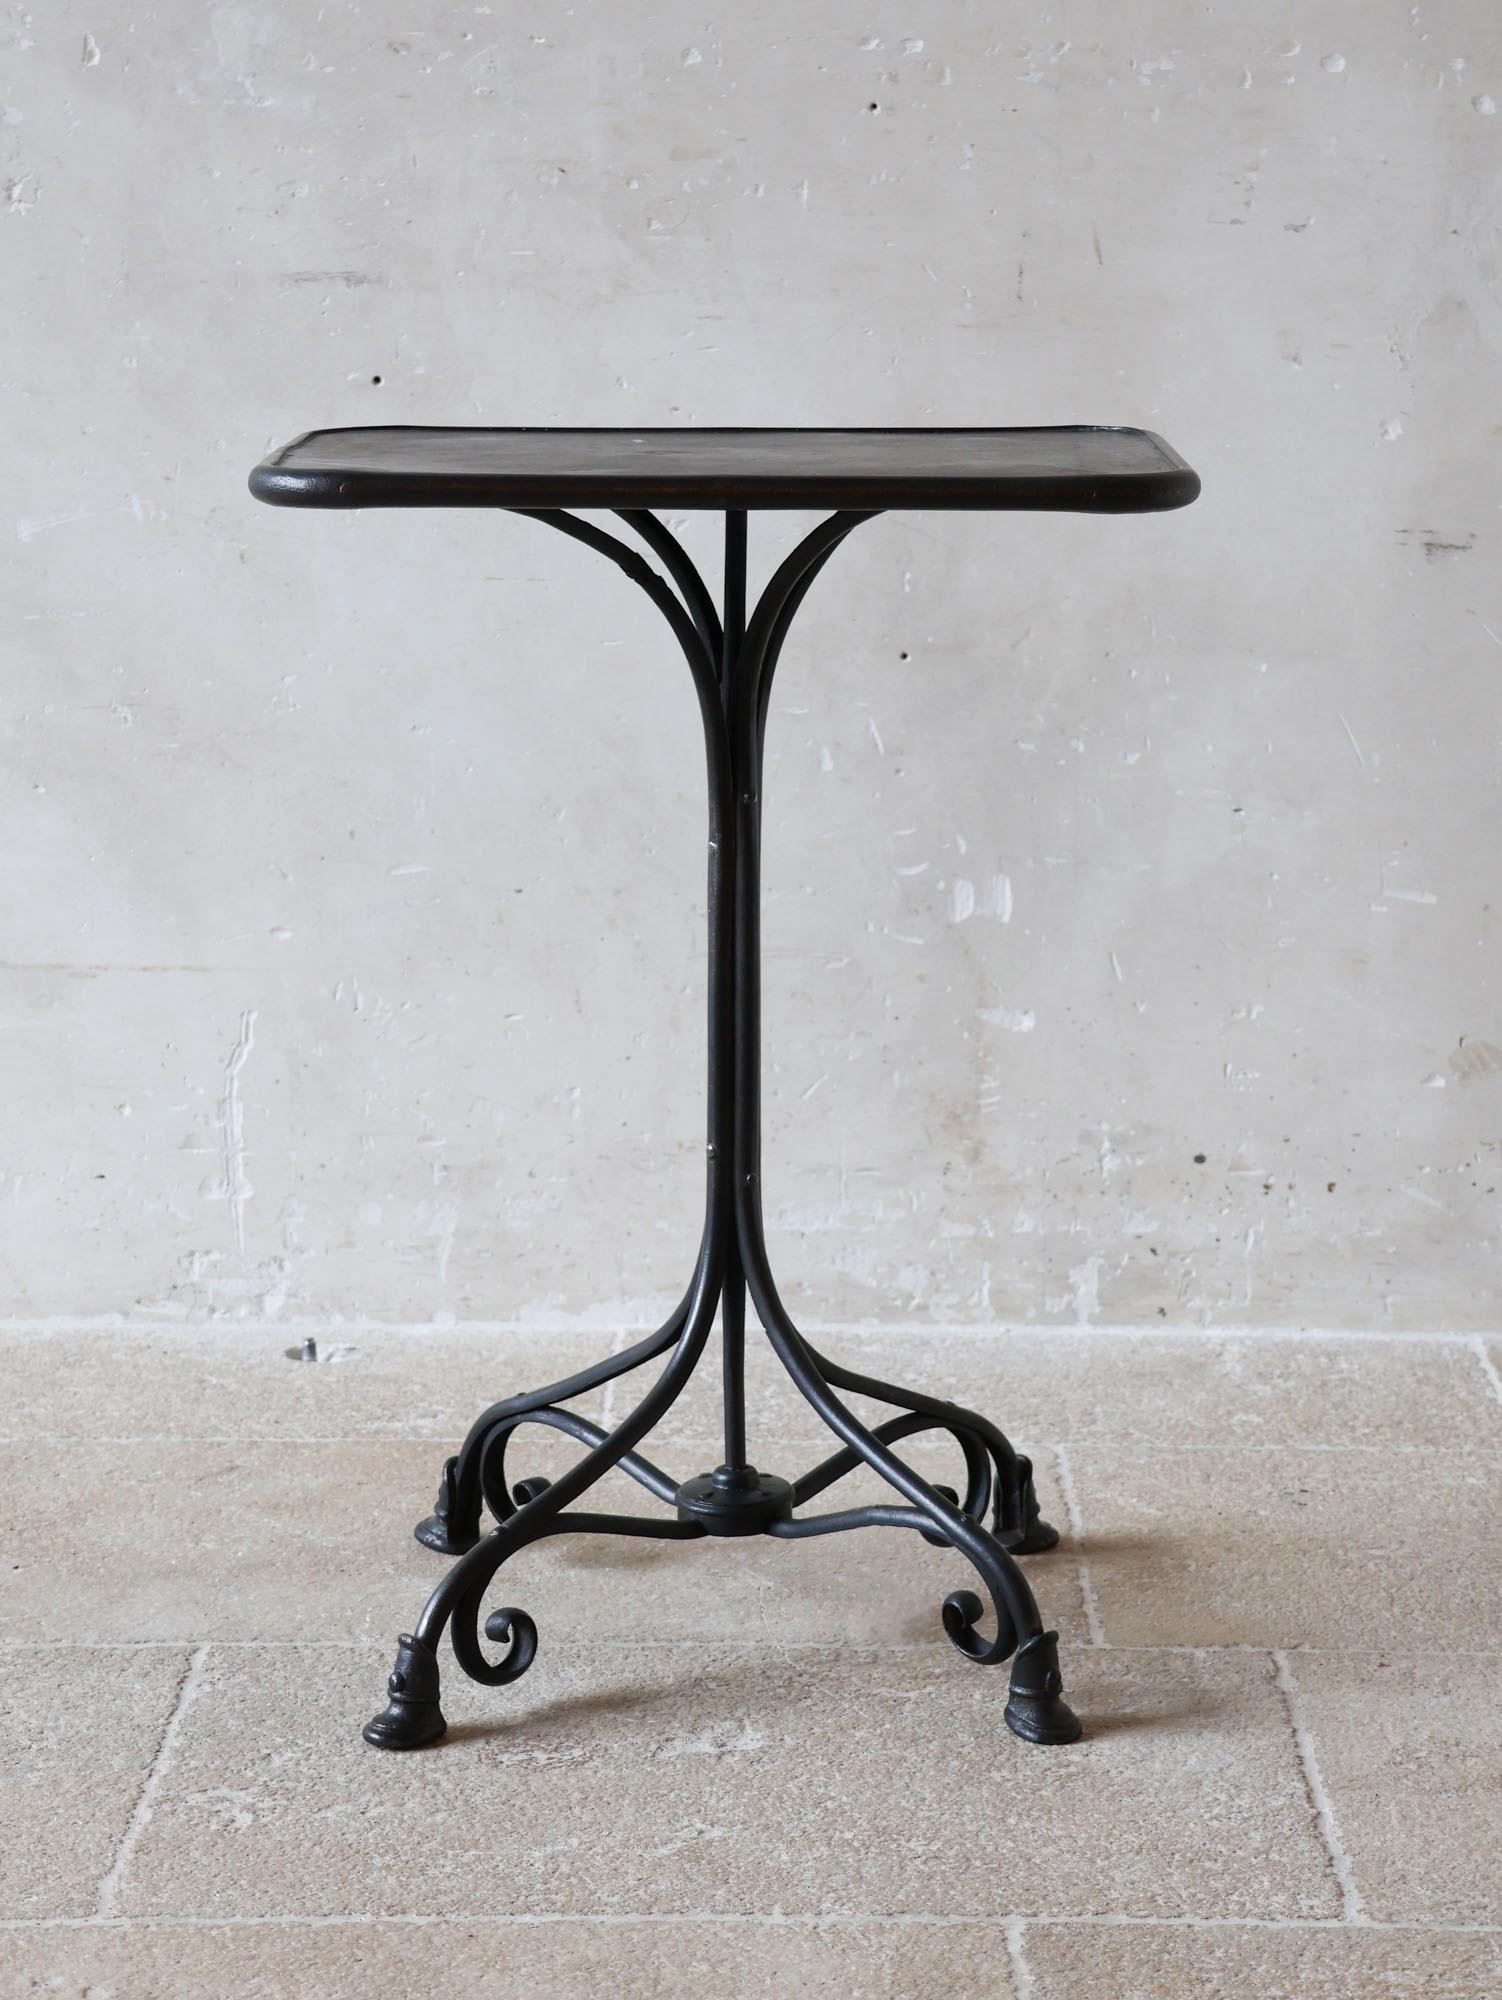 Antique Arras bistro table, crafted from polished wrought and cast iron. This table  features riveted connections and the iconic horseshoe feet characteristic of the Arras style, complemented by the original table top. Made around 1900 in Arras,